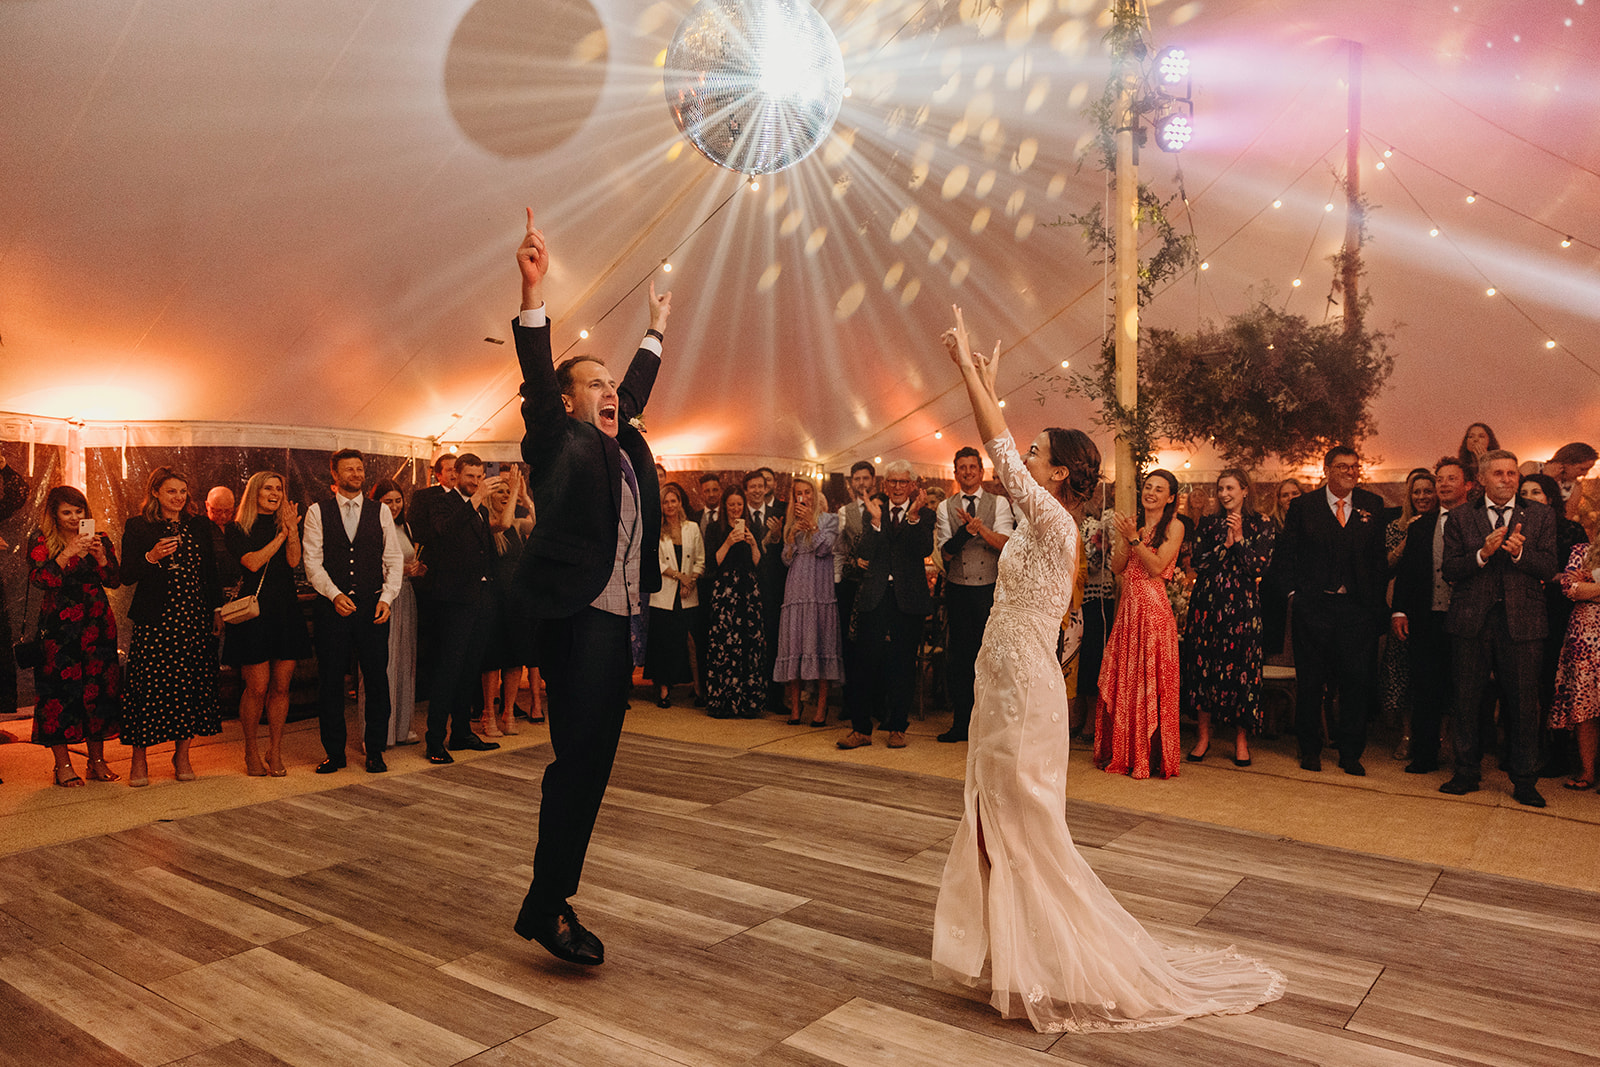 Couple first dance with hands in air as disco ball illuminates dancefloor